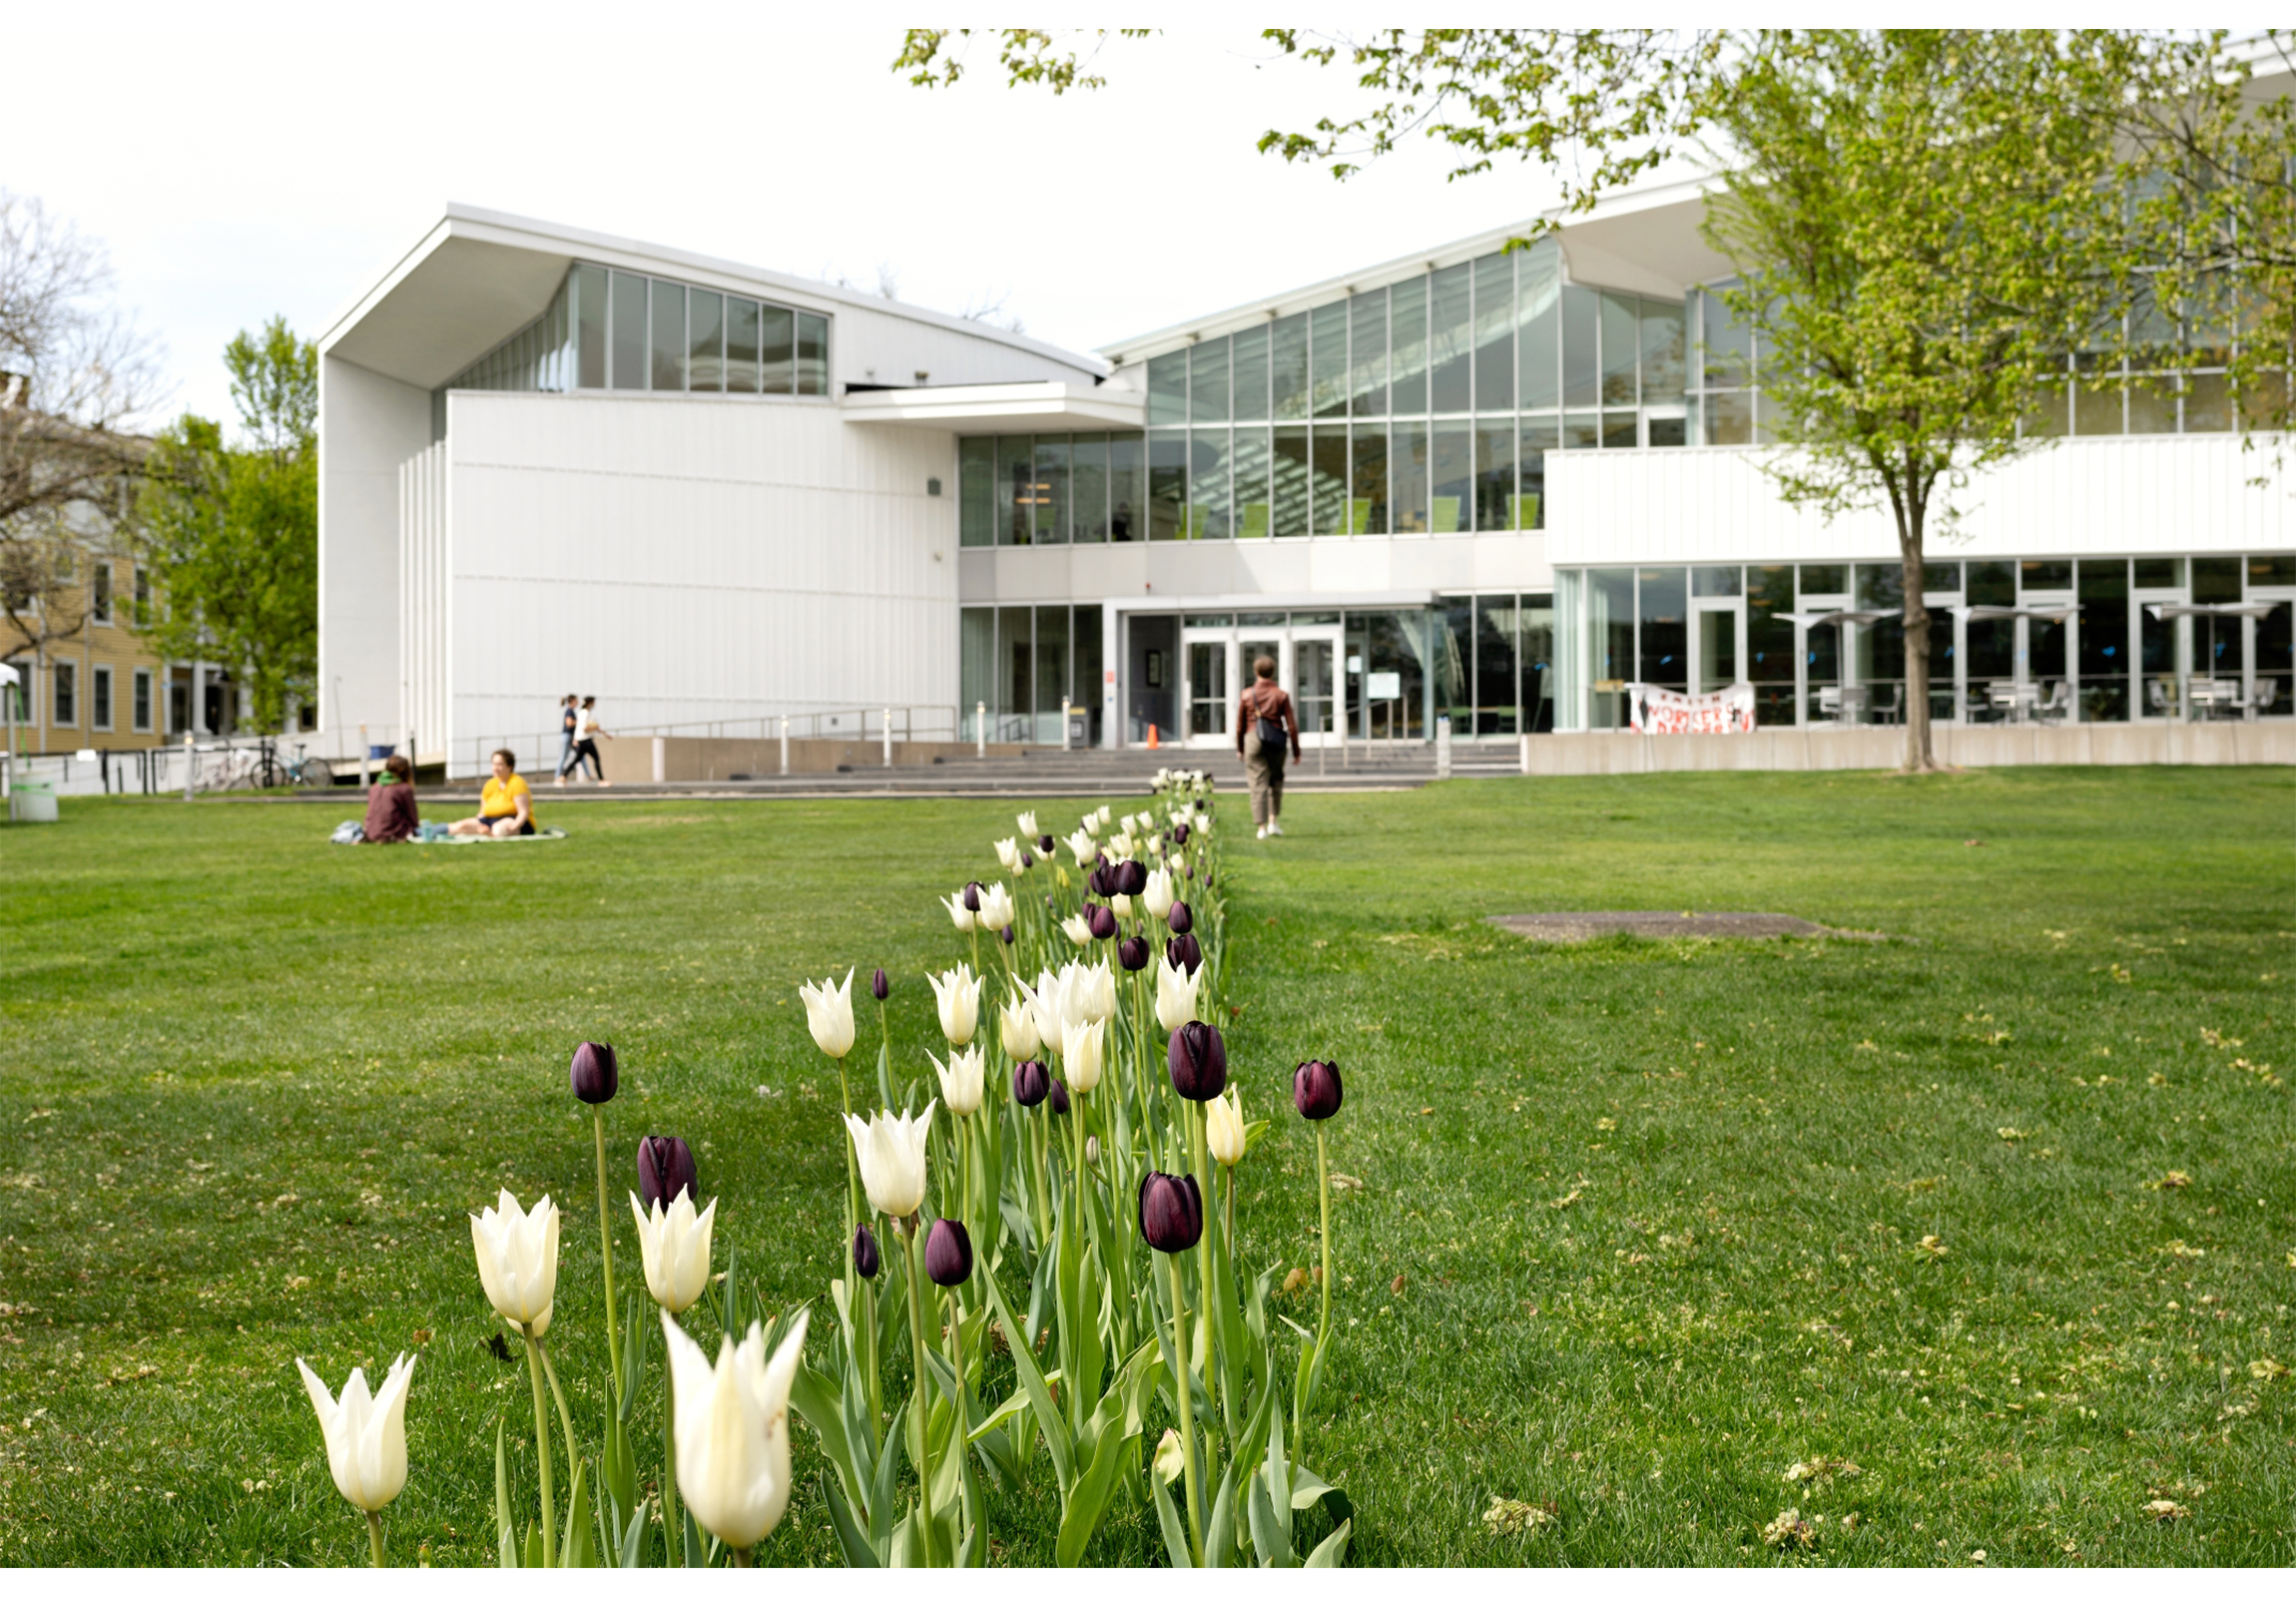 line of black and white tulips leading up to a white modern building with five people walking/sitting in background